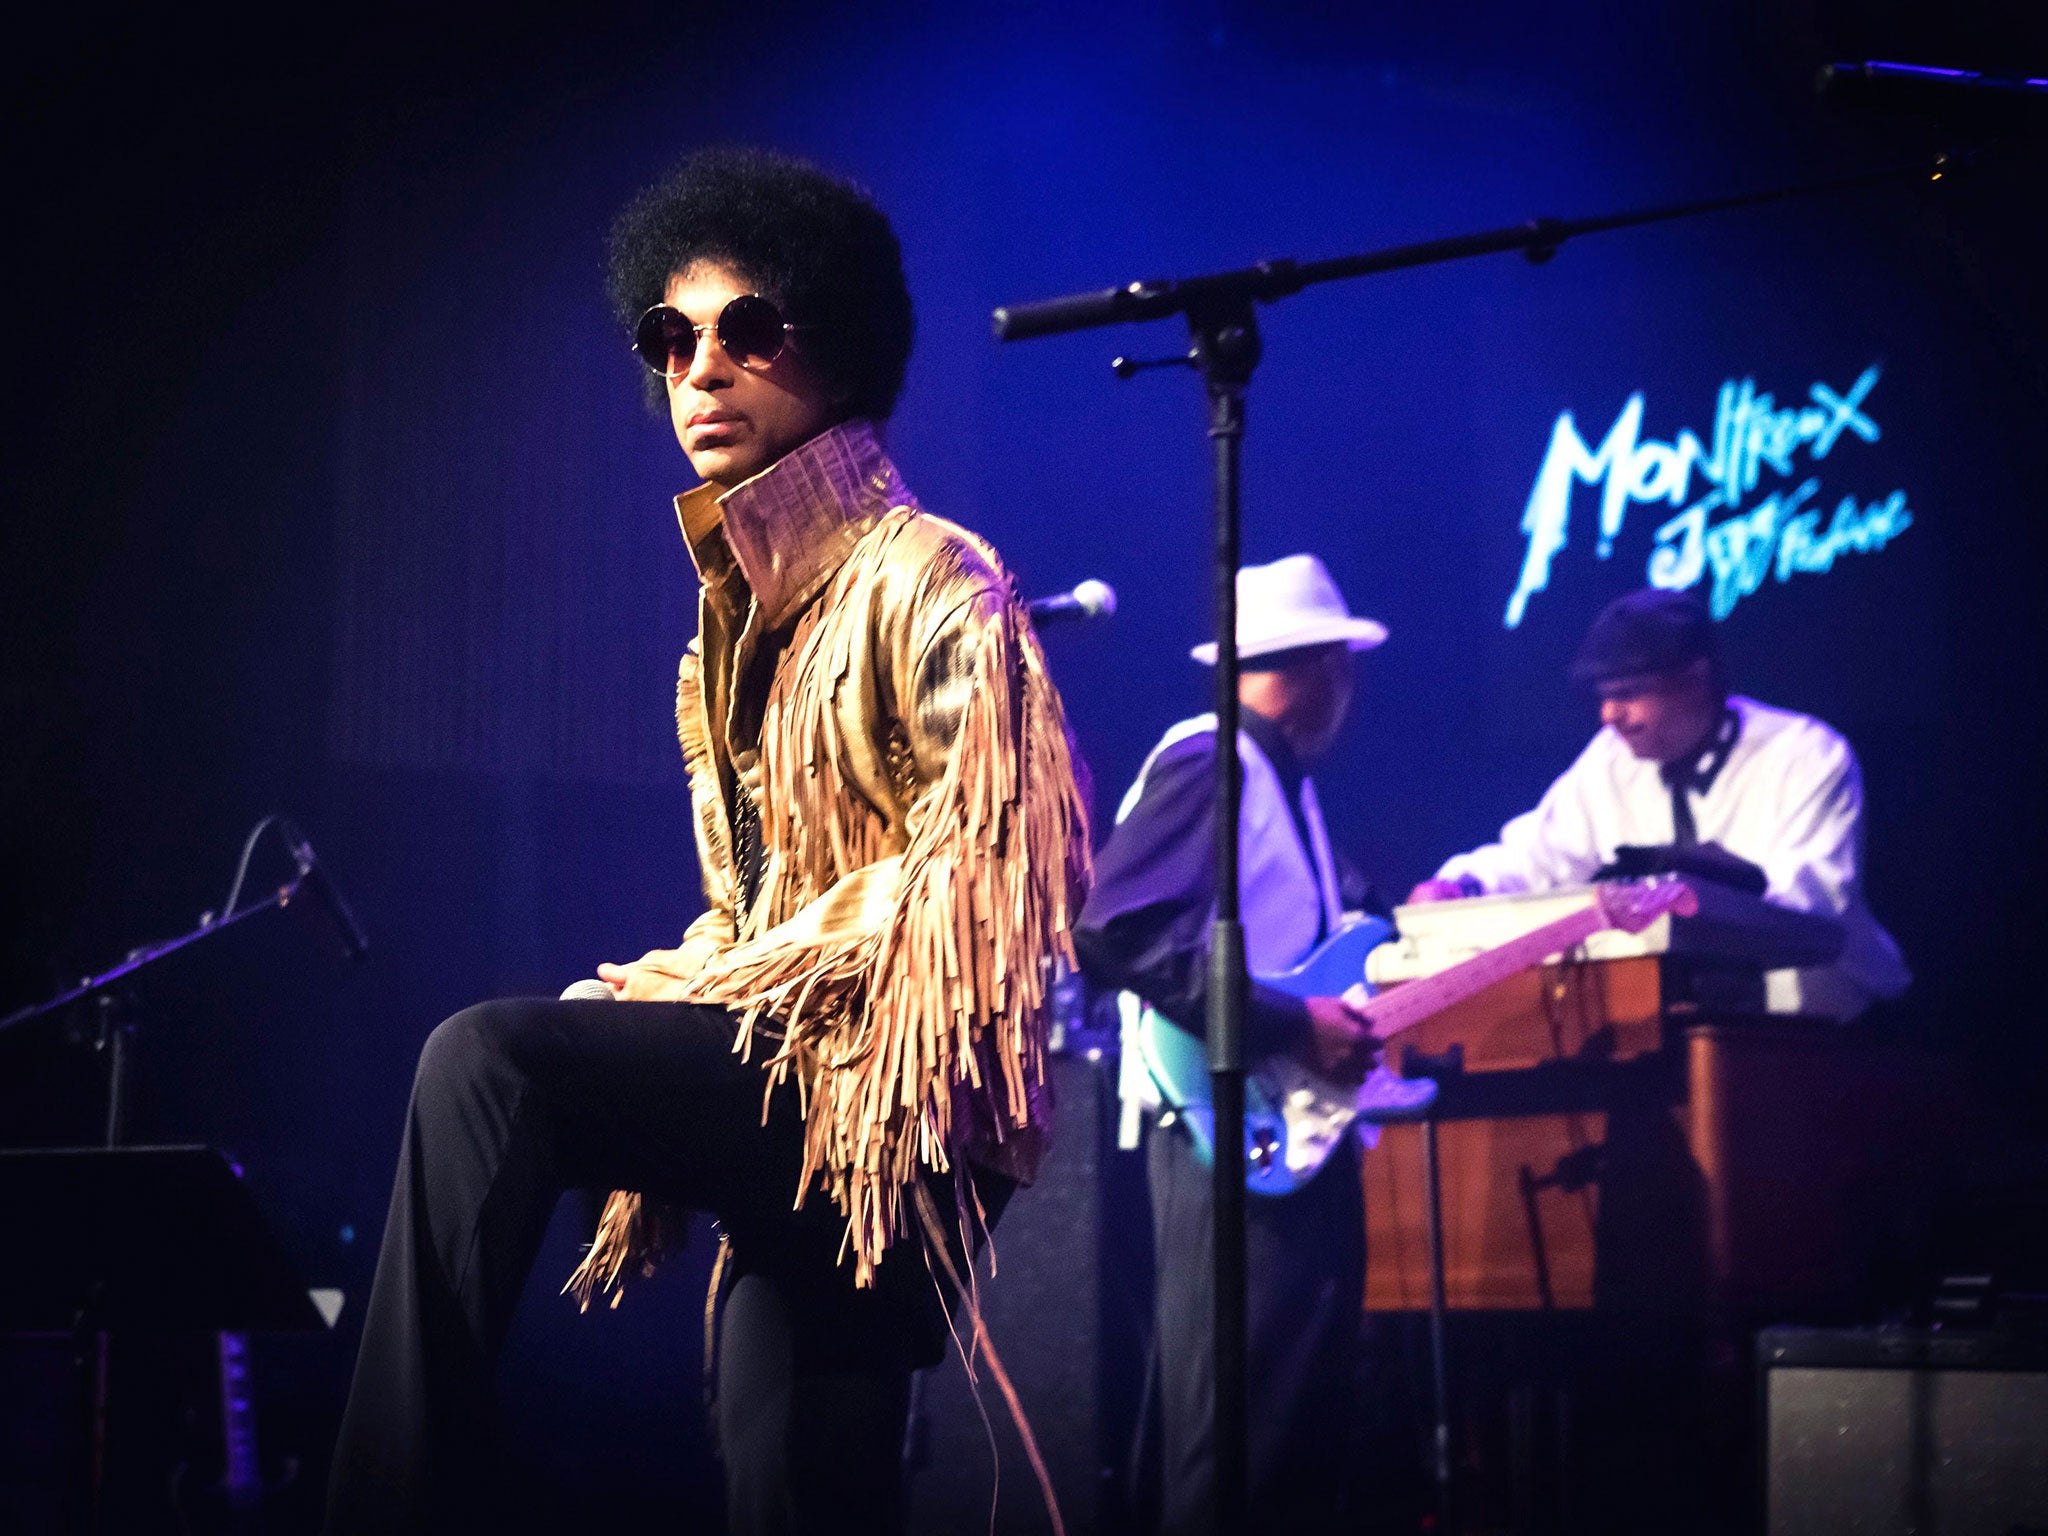 The artist Prince, who died at the age of 57